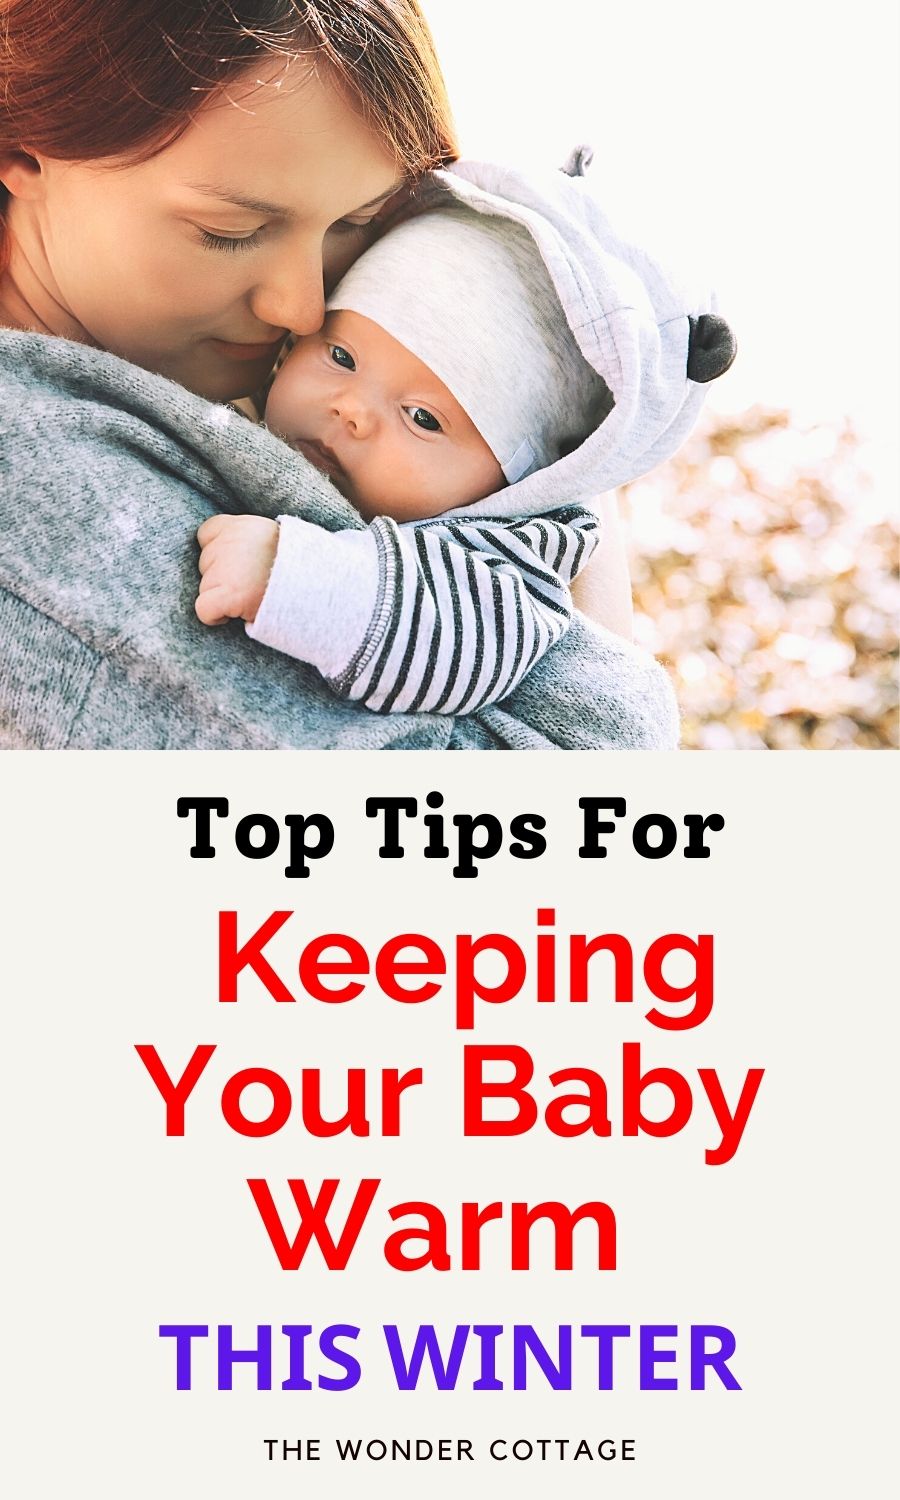 Tops Tips For Keeping Your Baby Warm This Winter